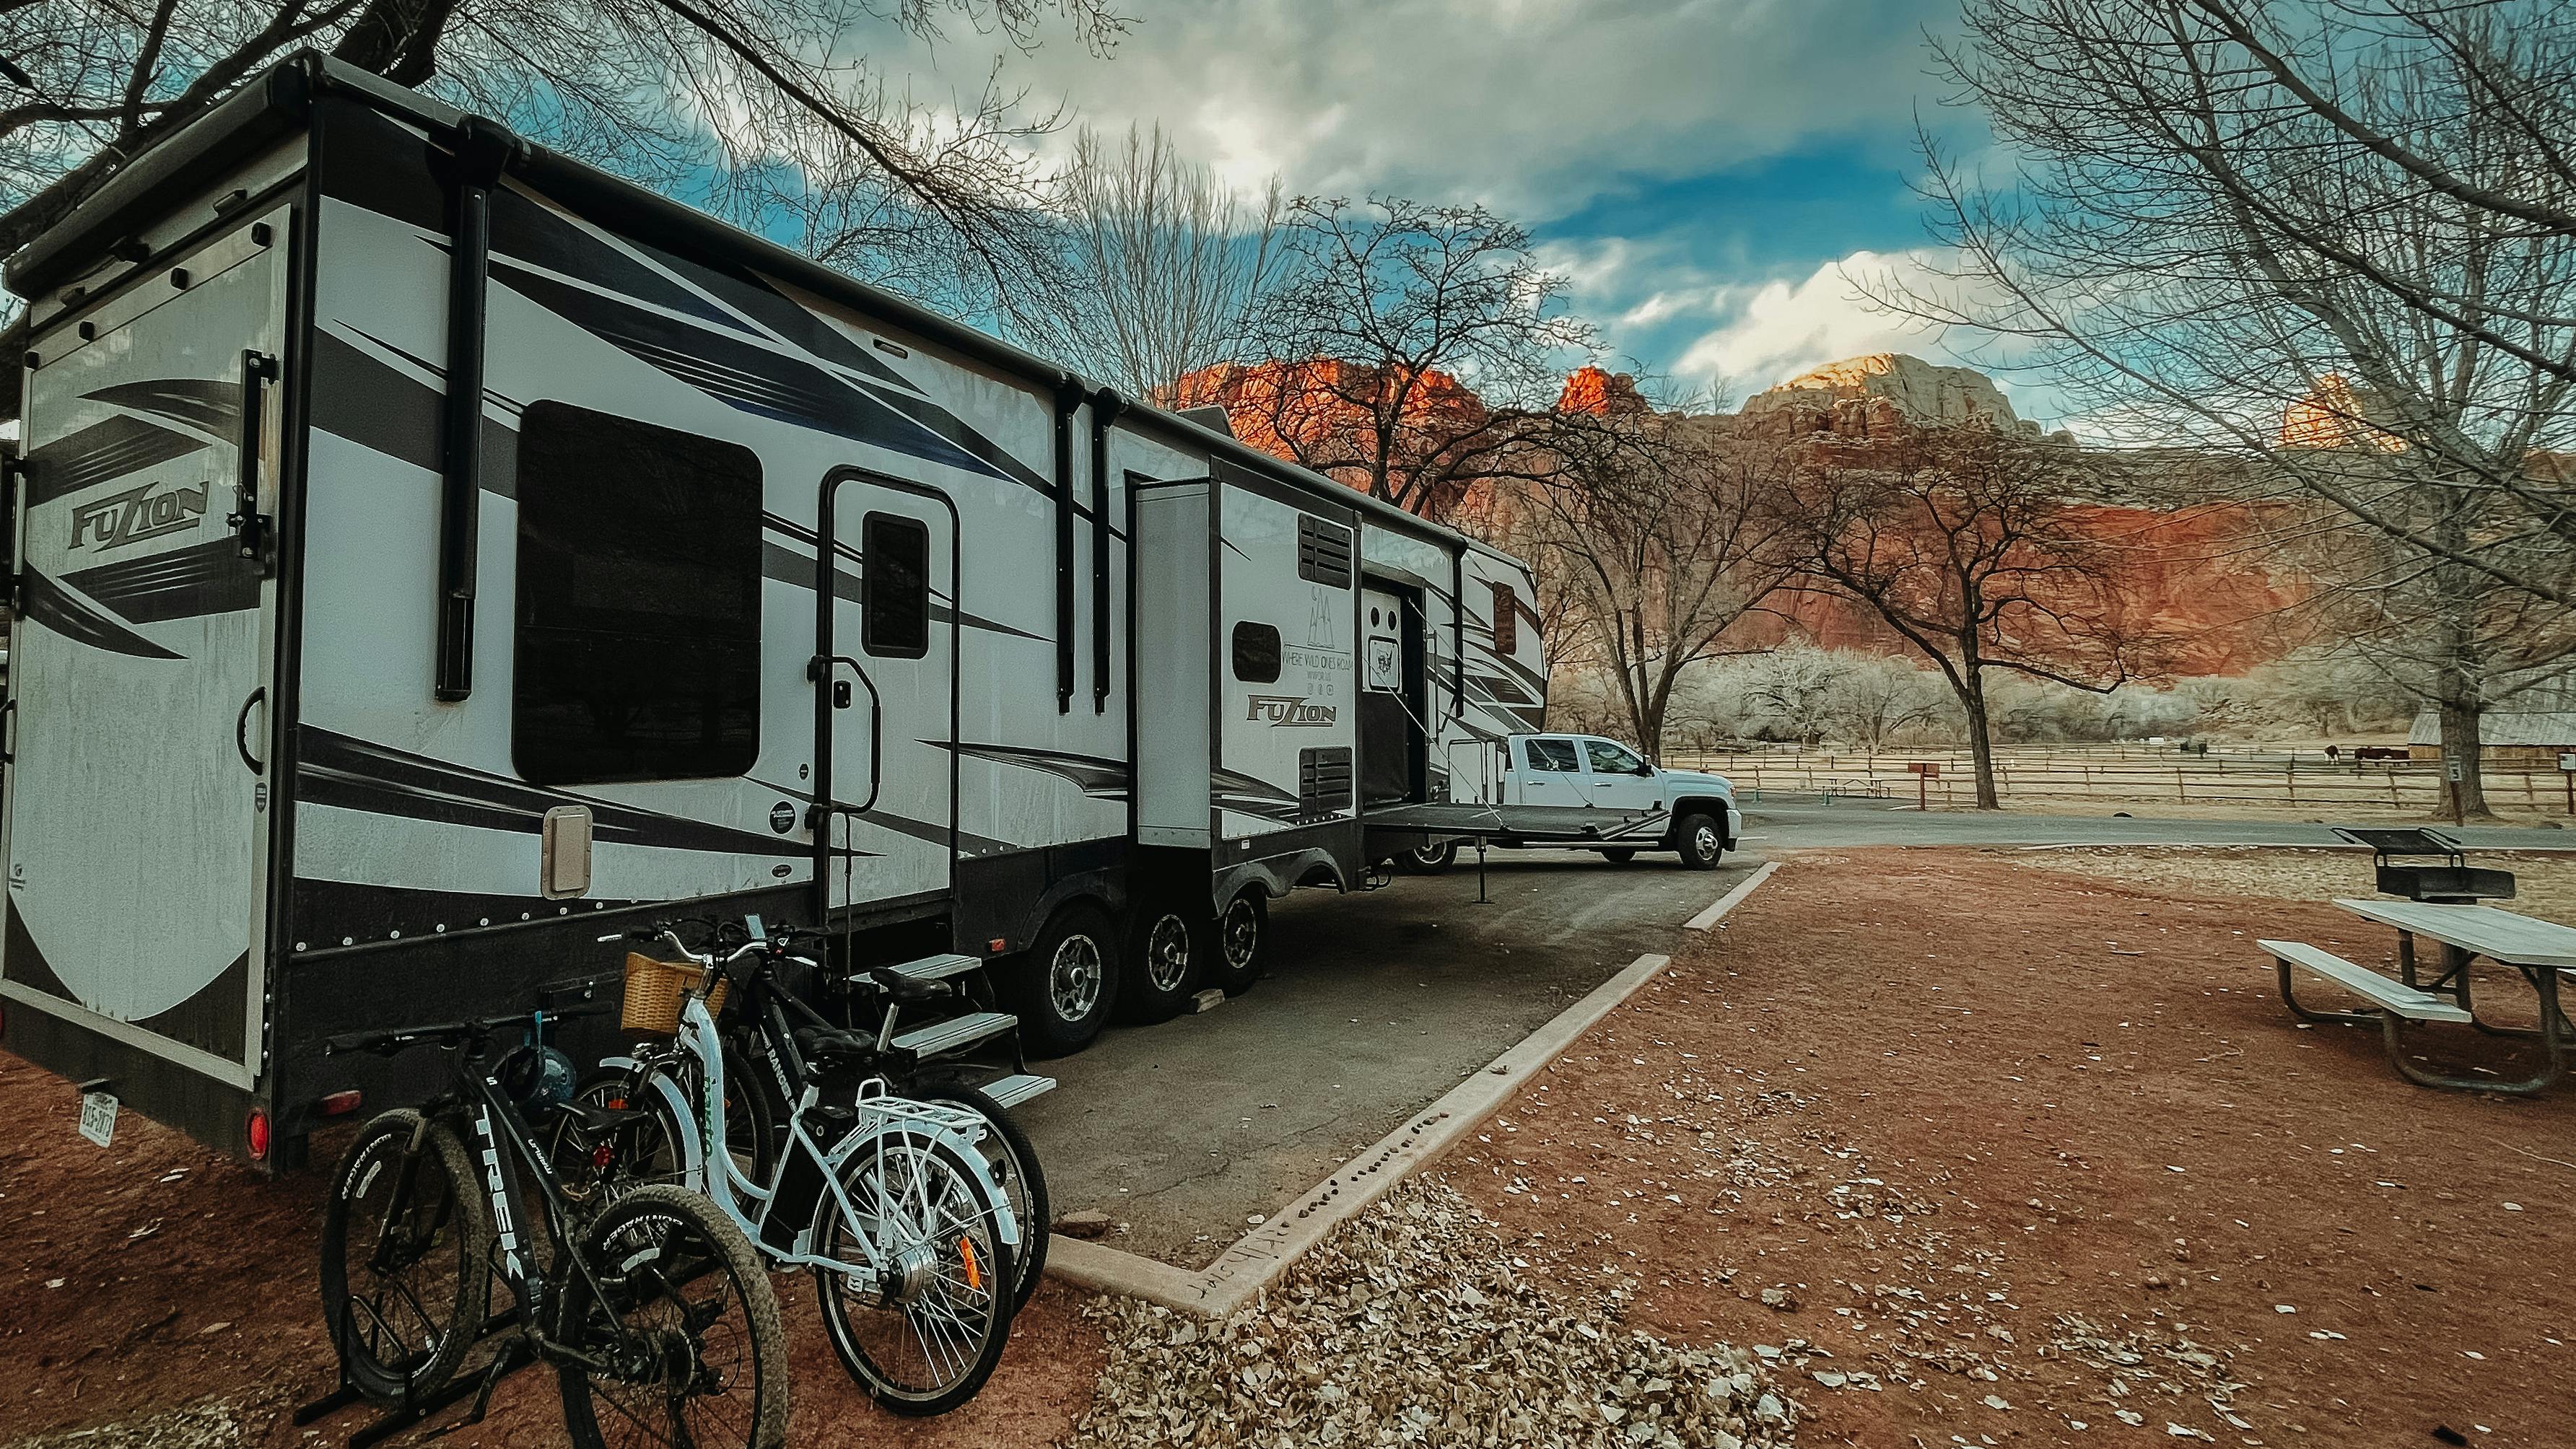 Andy and Kristen Murphy's Keystone Fuzion RV parked at a campsite with bikes leaning against the garage